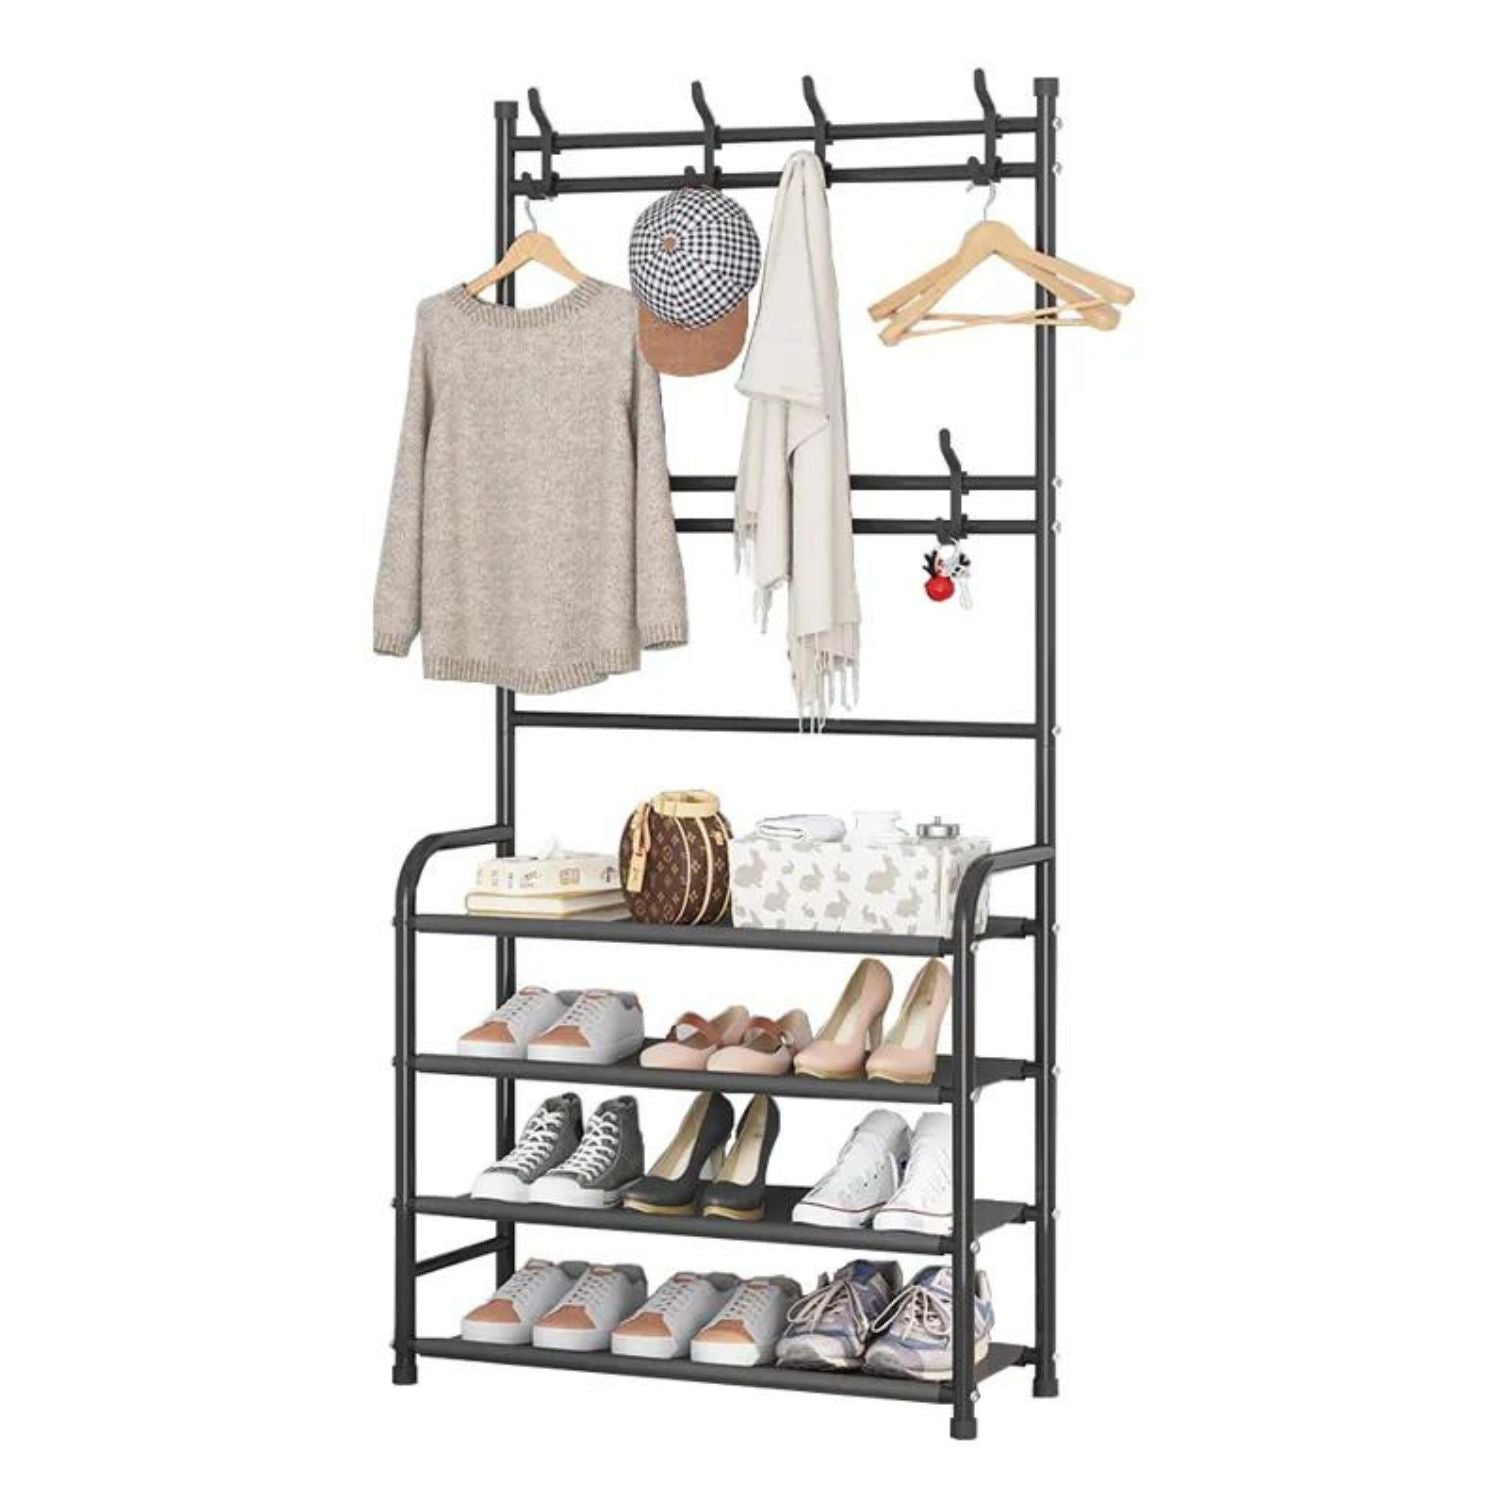 GOMINIMO Clothes Rack with Shoe Rack Shelves (Black)